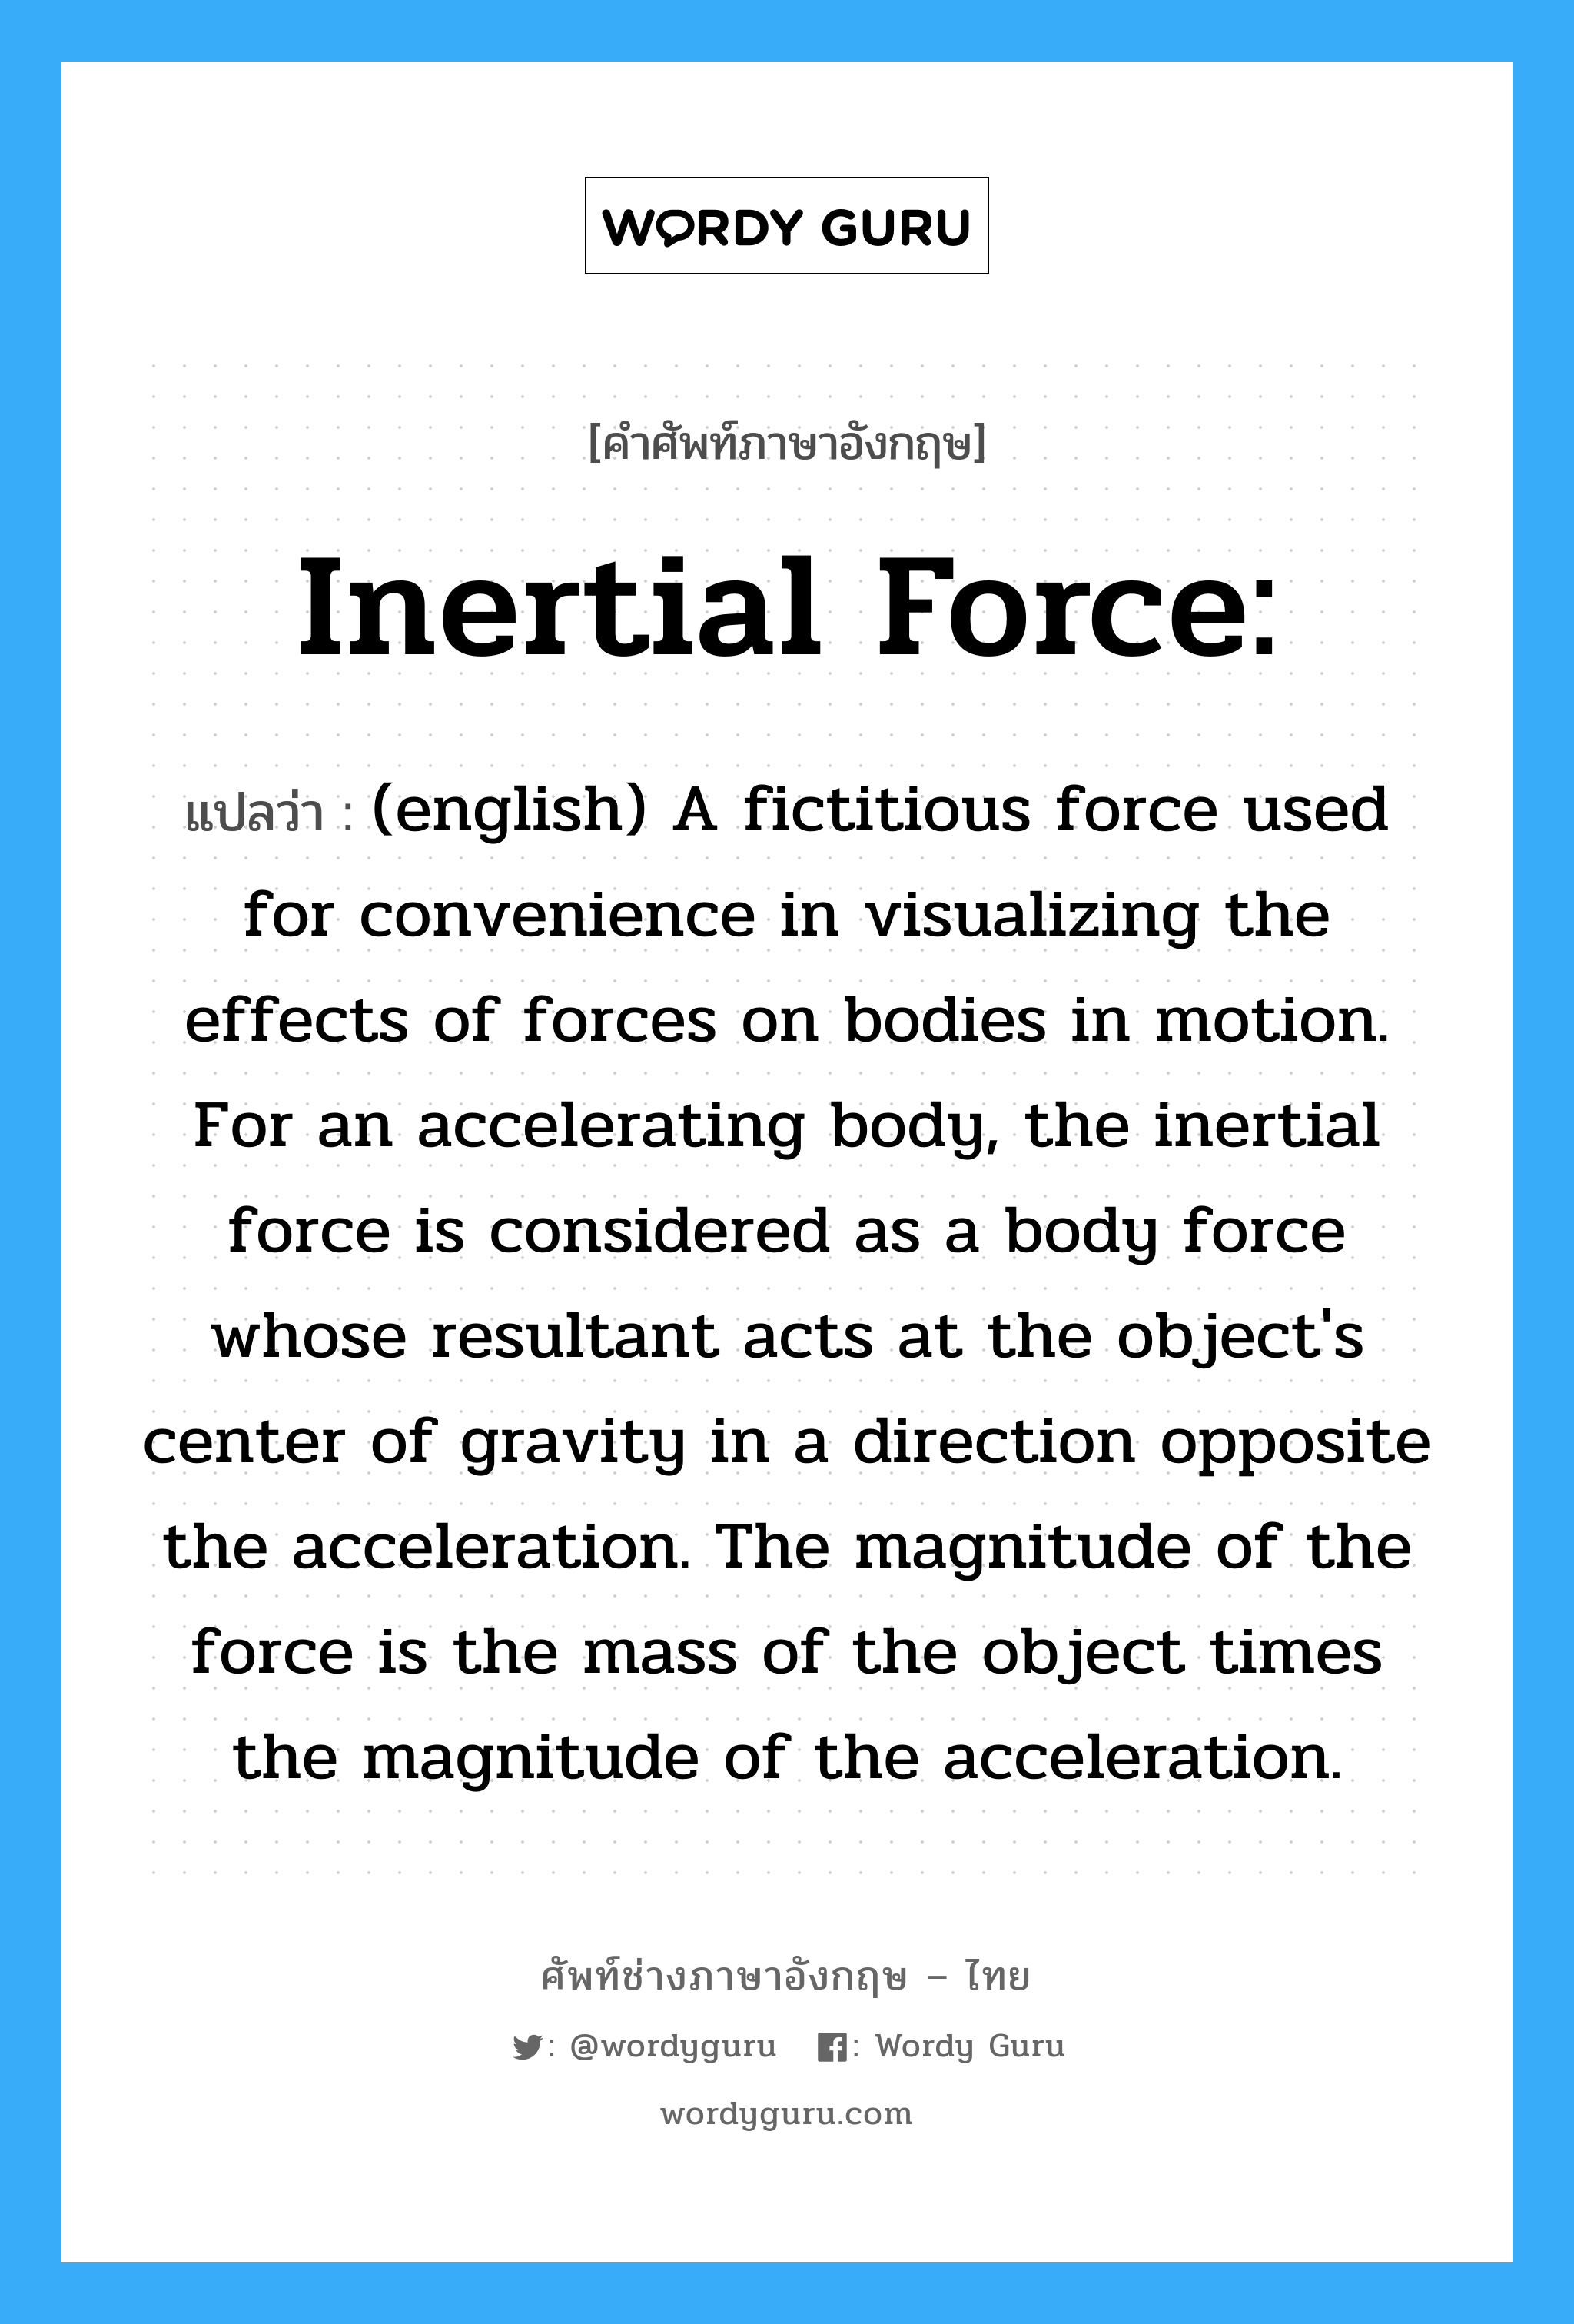 Inertial Force: แปลว่า?, คำศัพท์ช่างภาษาอังกฤษ - ไทย Inertial Force: คำศัพท์ภาษาอังกฤษ Inertial Force: แปลว่า (english) A fictitious force used for convenience in visualizing the effects of forces on bodies in motion. For an accelerating body, the inertial force is considered as a body force whose resultant acts at the object's center of gravity in a direction opposite the acceleration. The magnitude of the force is the mass of the object times the magnitude of the acceleration.